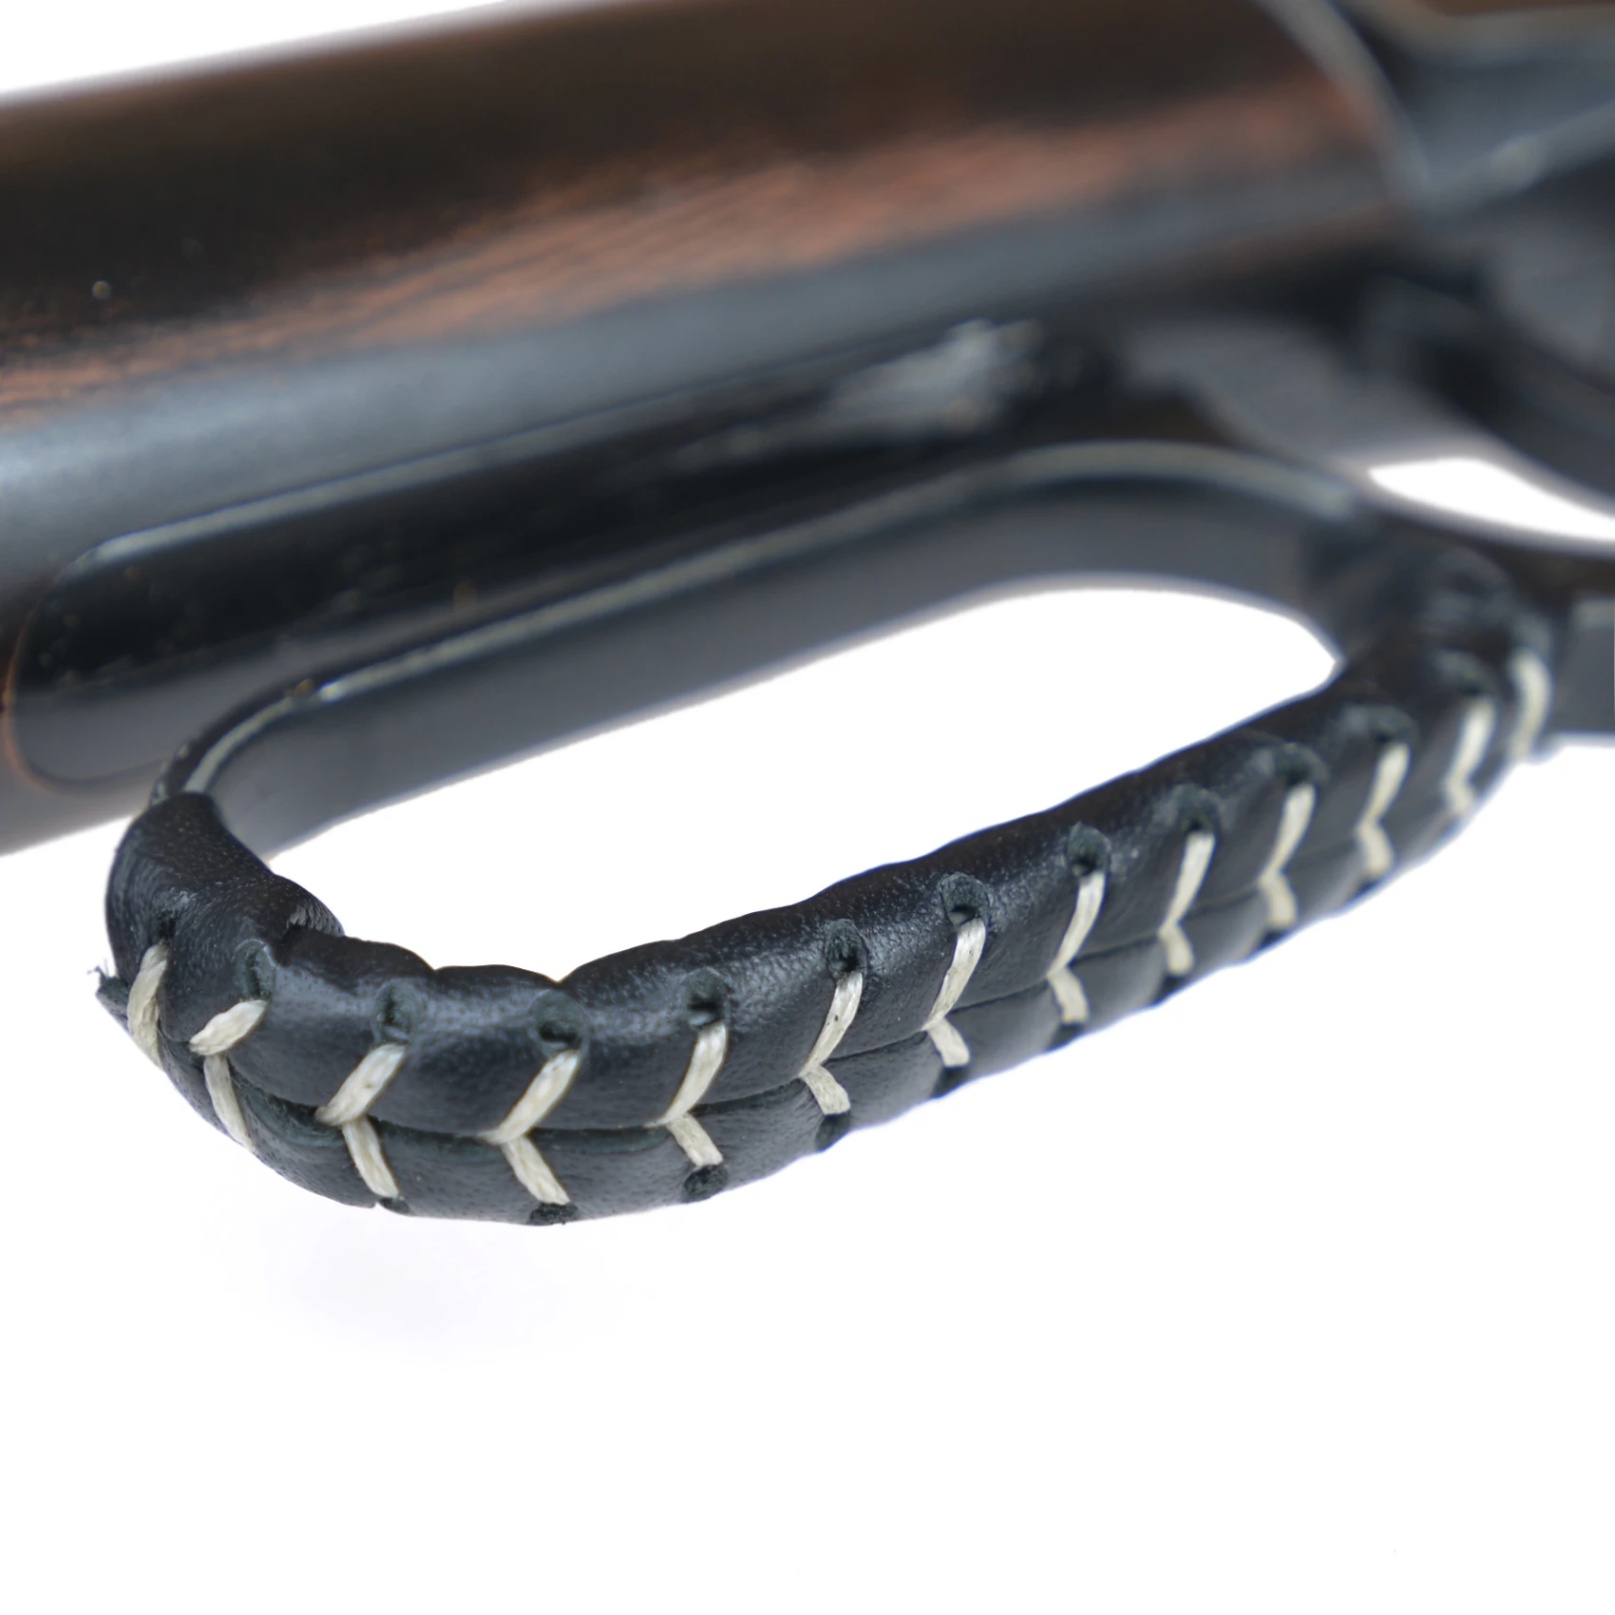 Upgrade Your Henry Rifle With Top-Quality Accessories For Optimal Performance